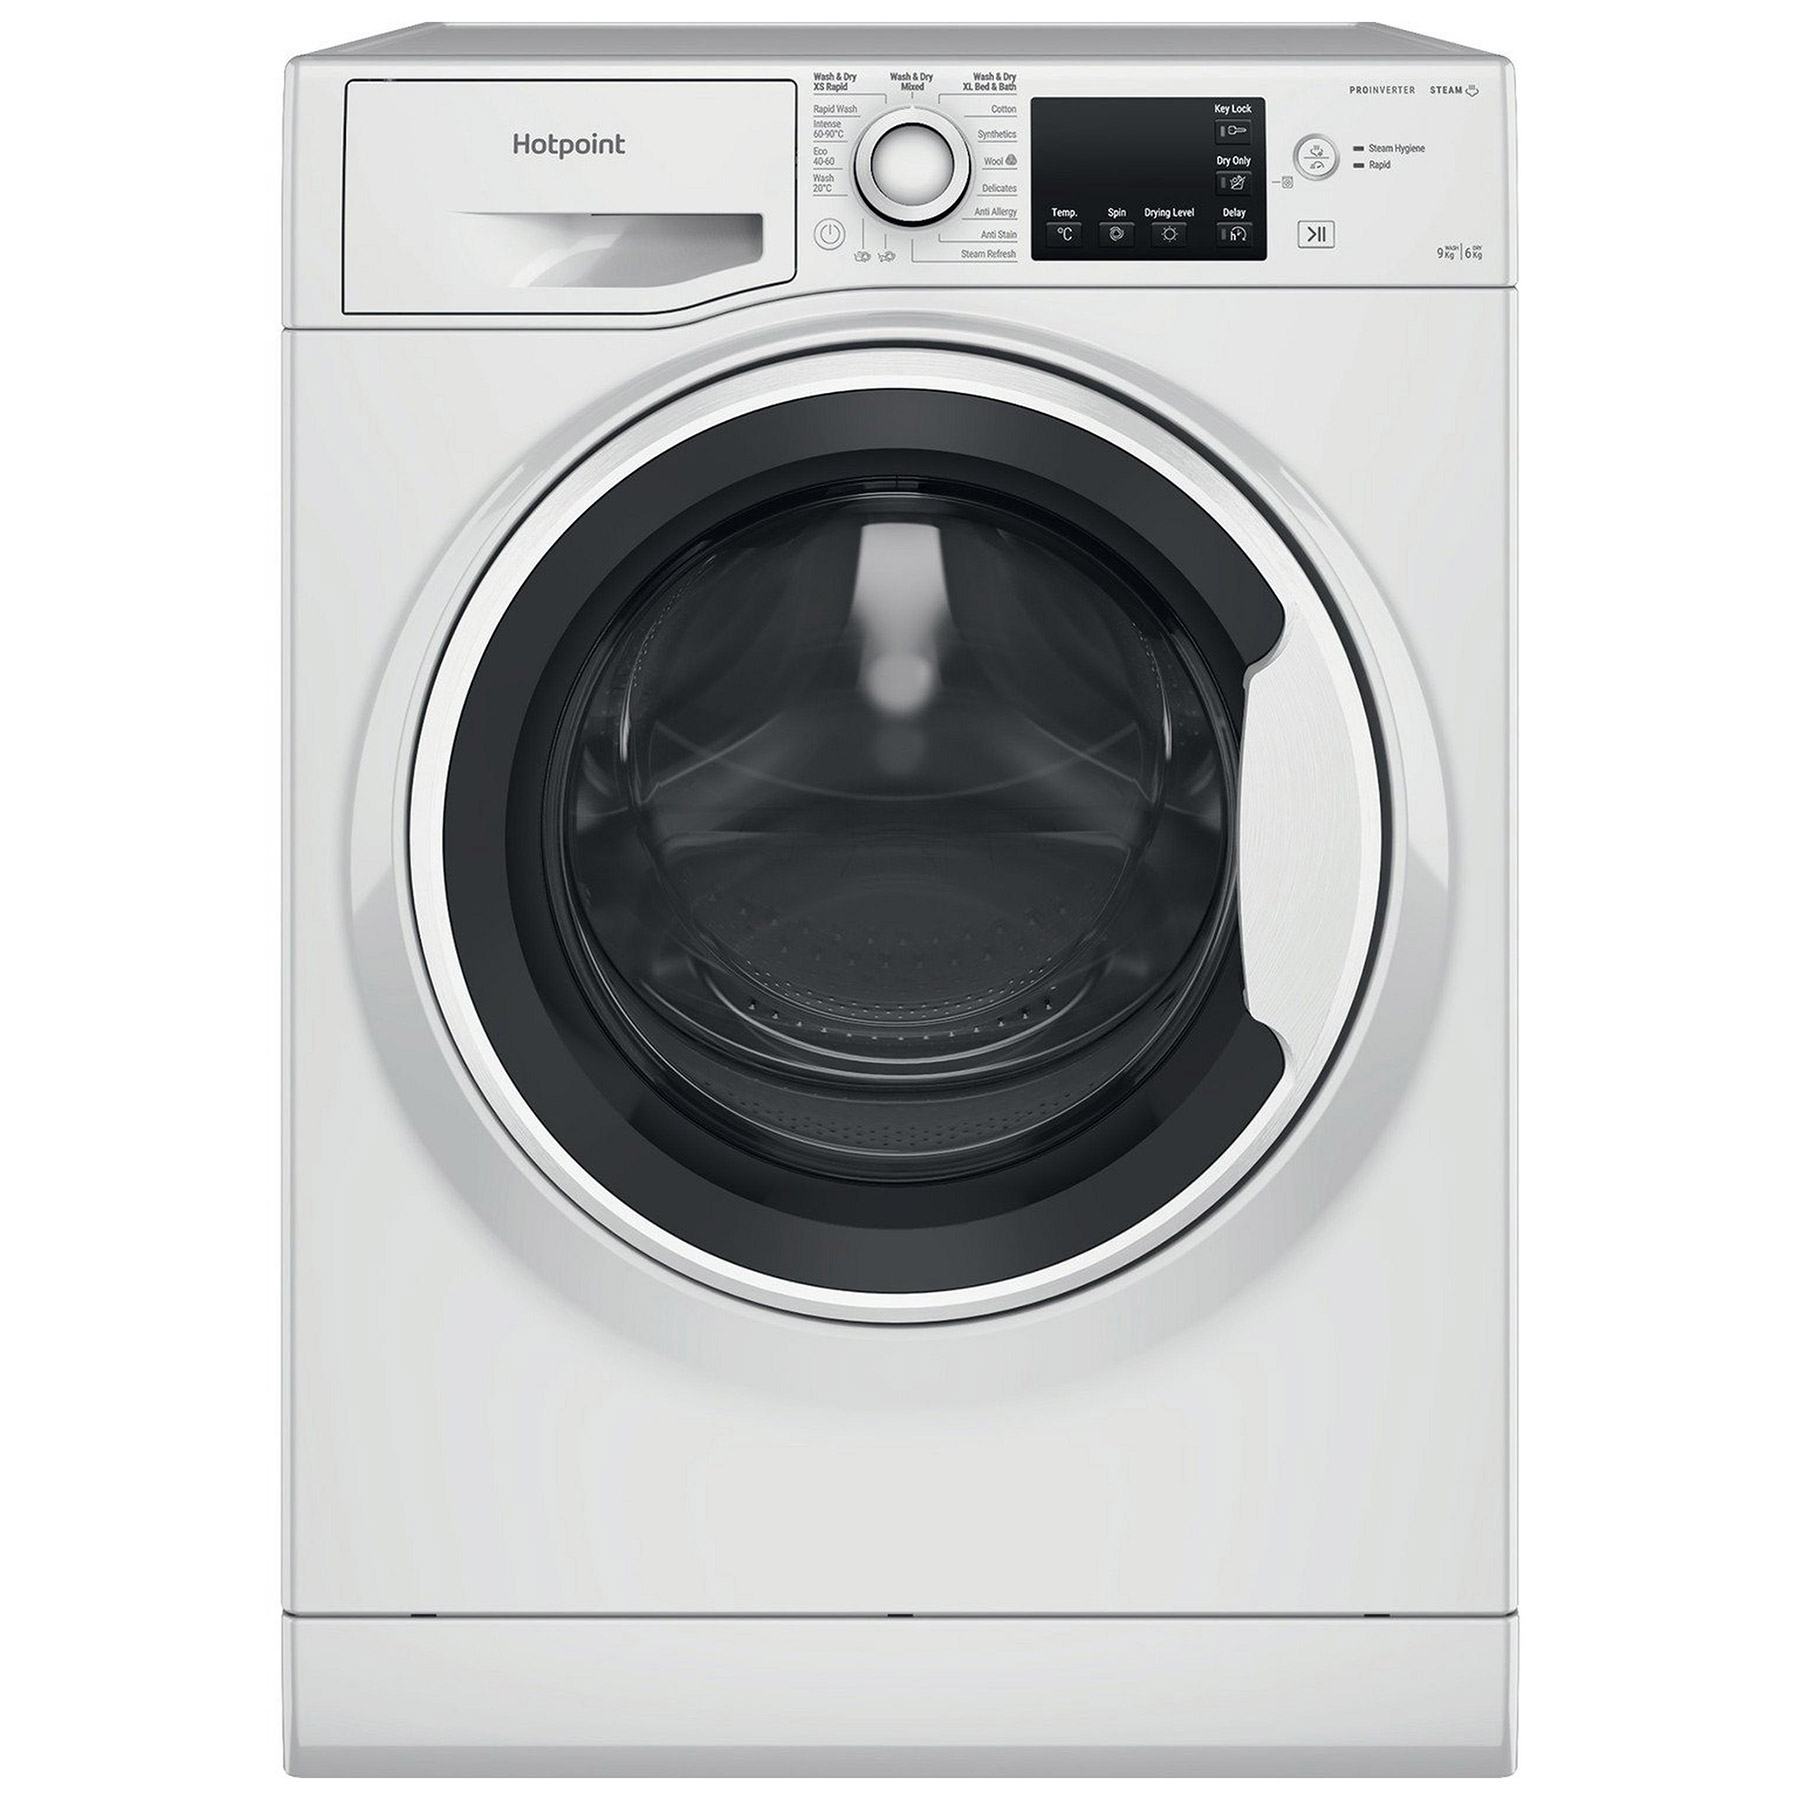 Image of Hotpoint NDBE9635WUK Washer Dryer in White 1400rpm 9kg 6kg D Rated